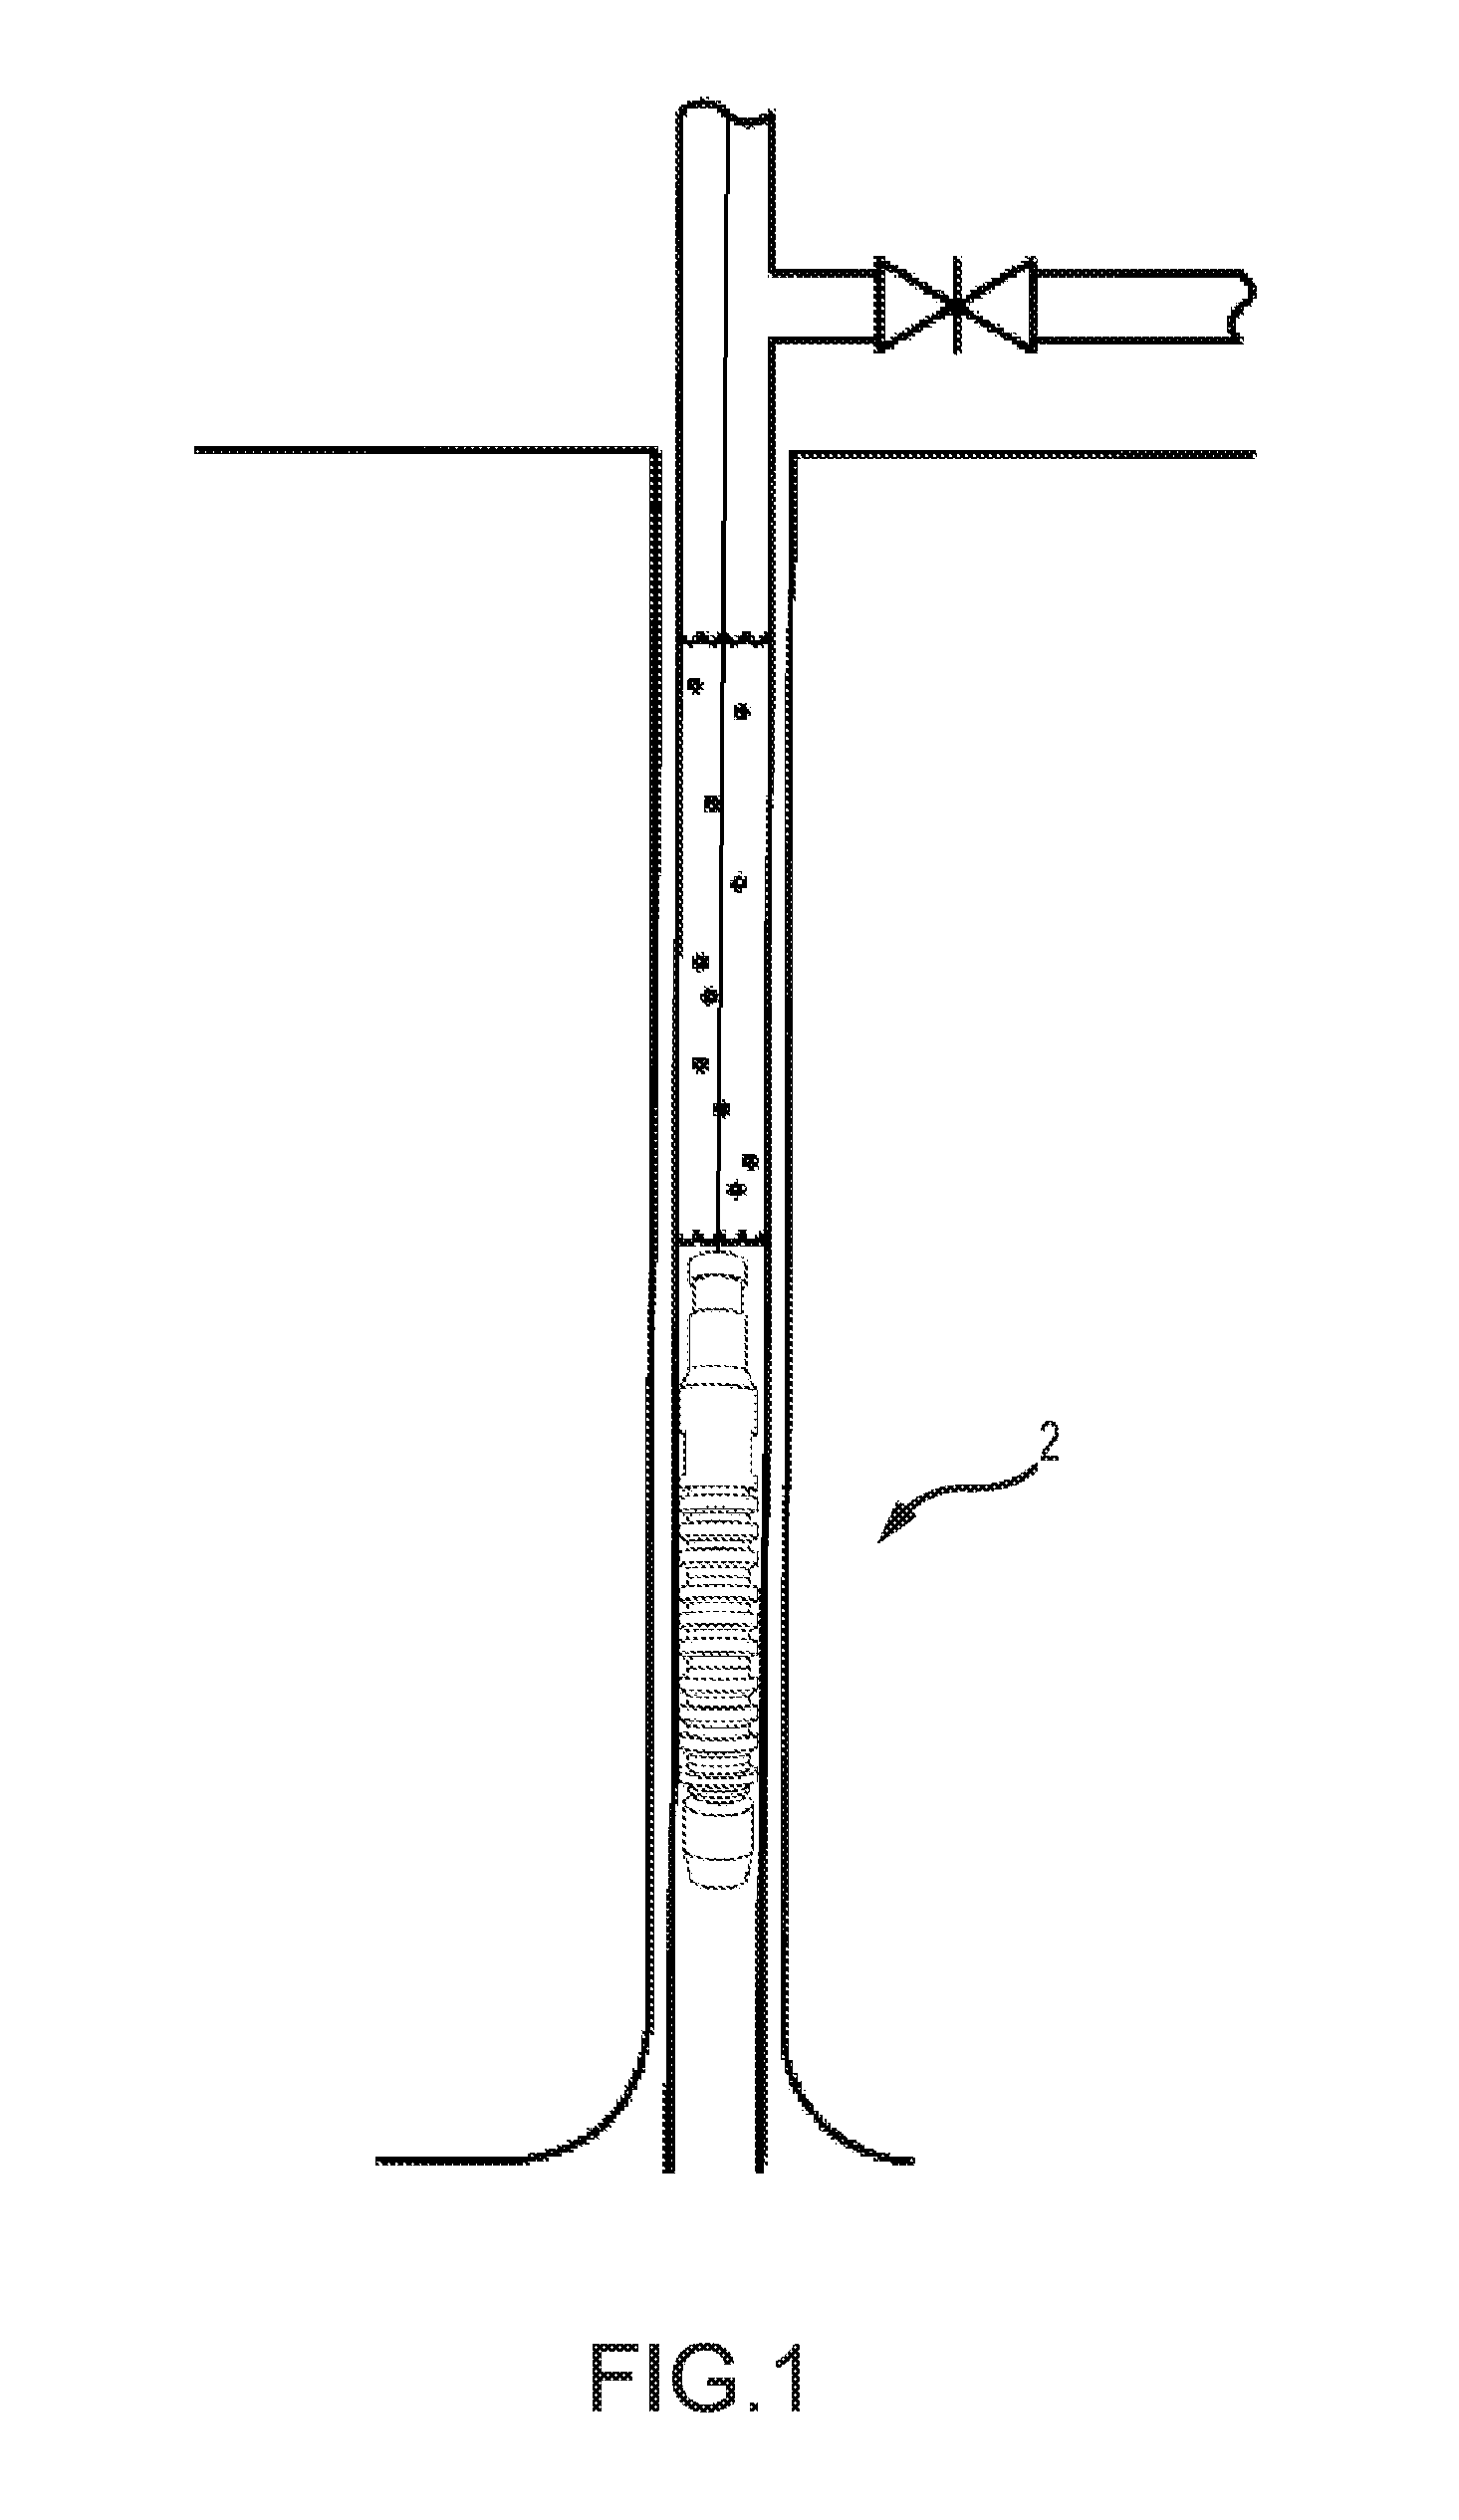 Modular plunger for a hydrocarbon wellbore